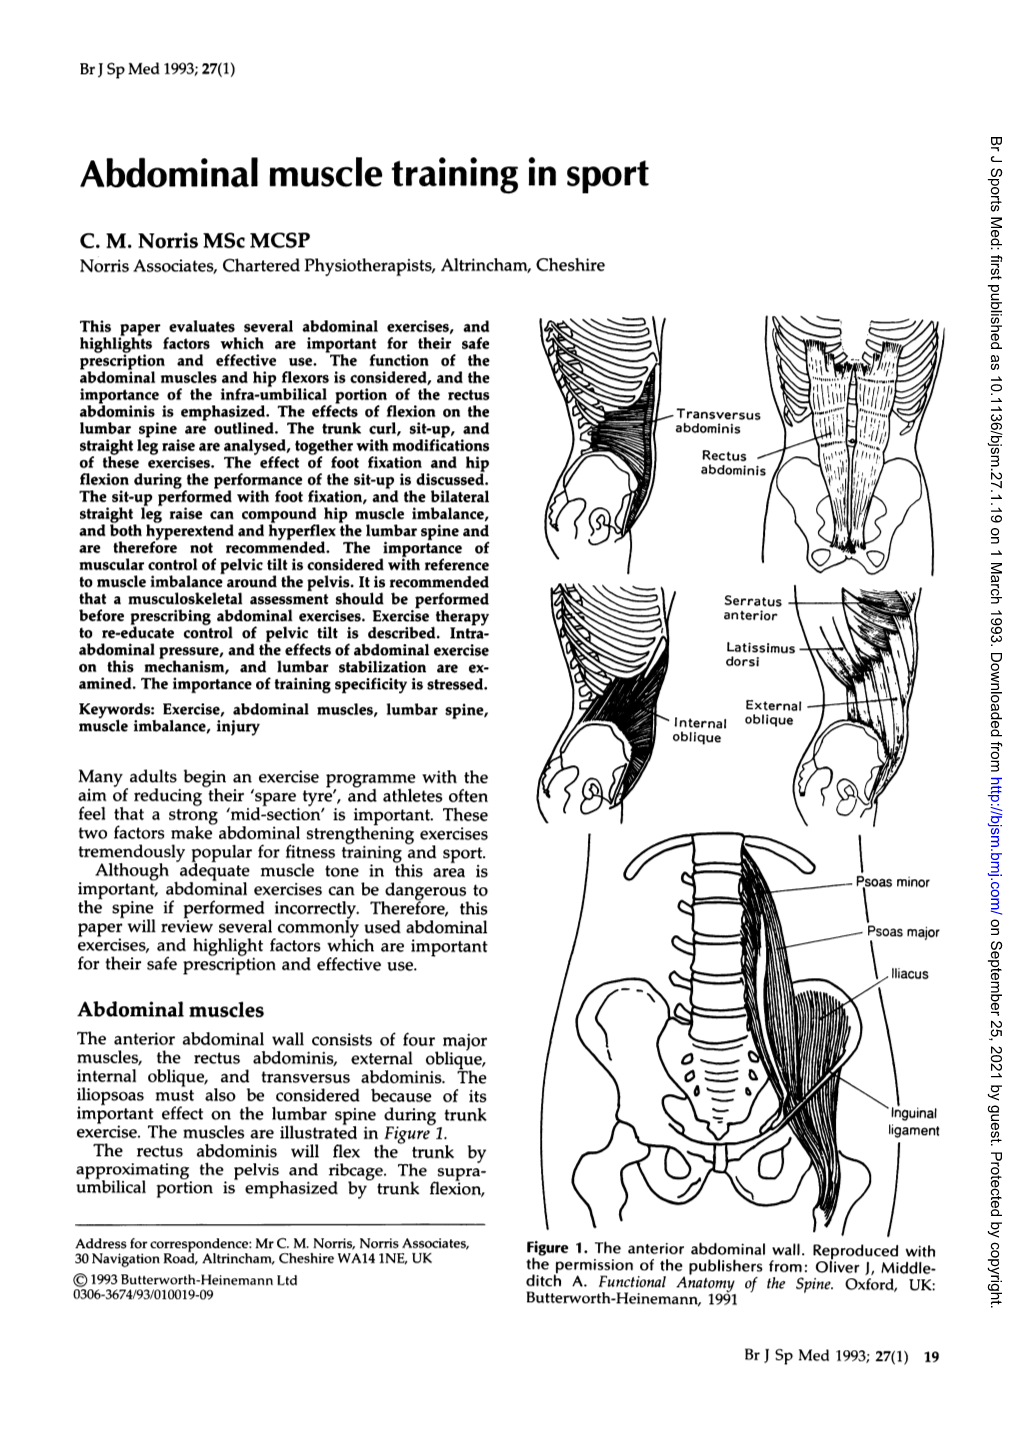 Abdominal Muscle Training in Sport